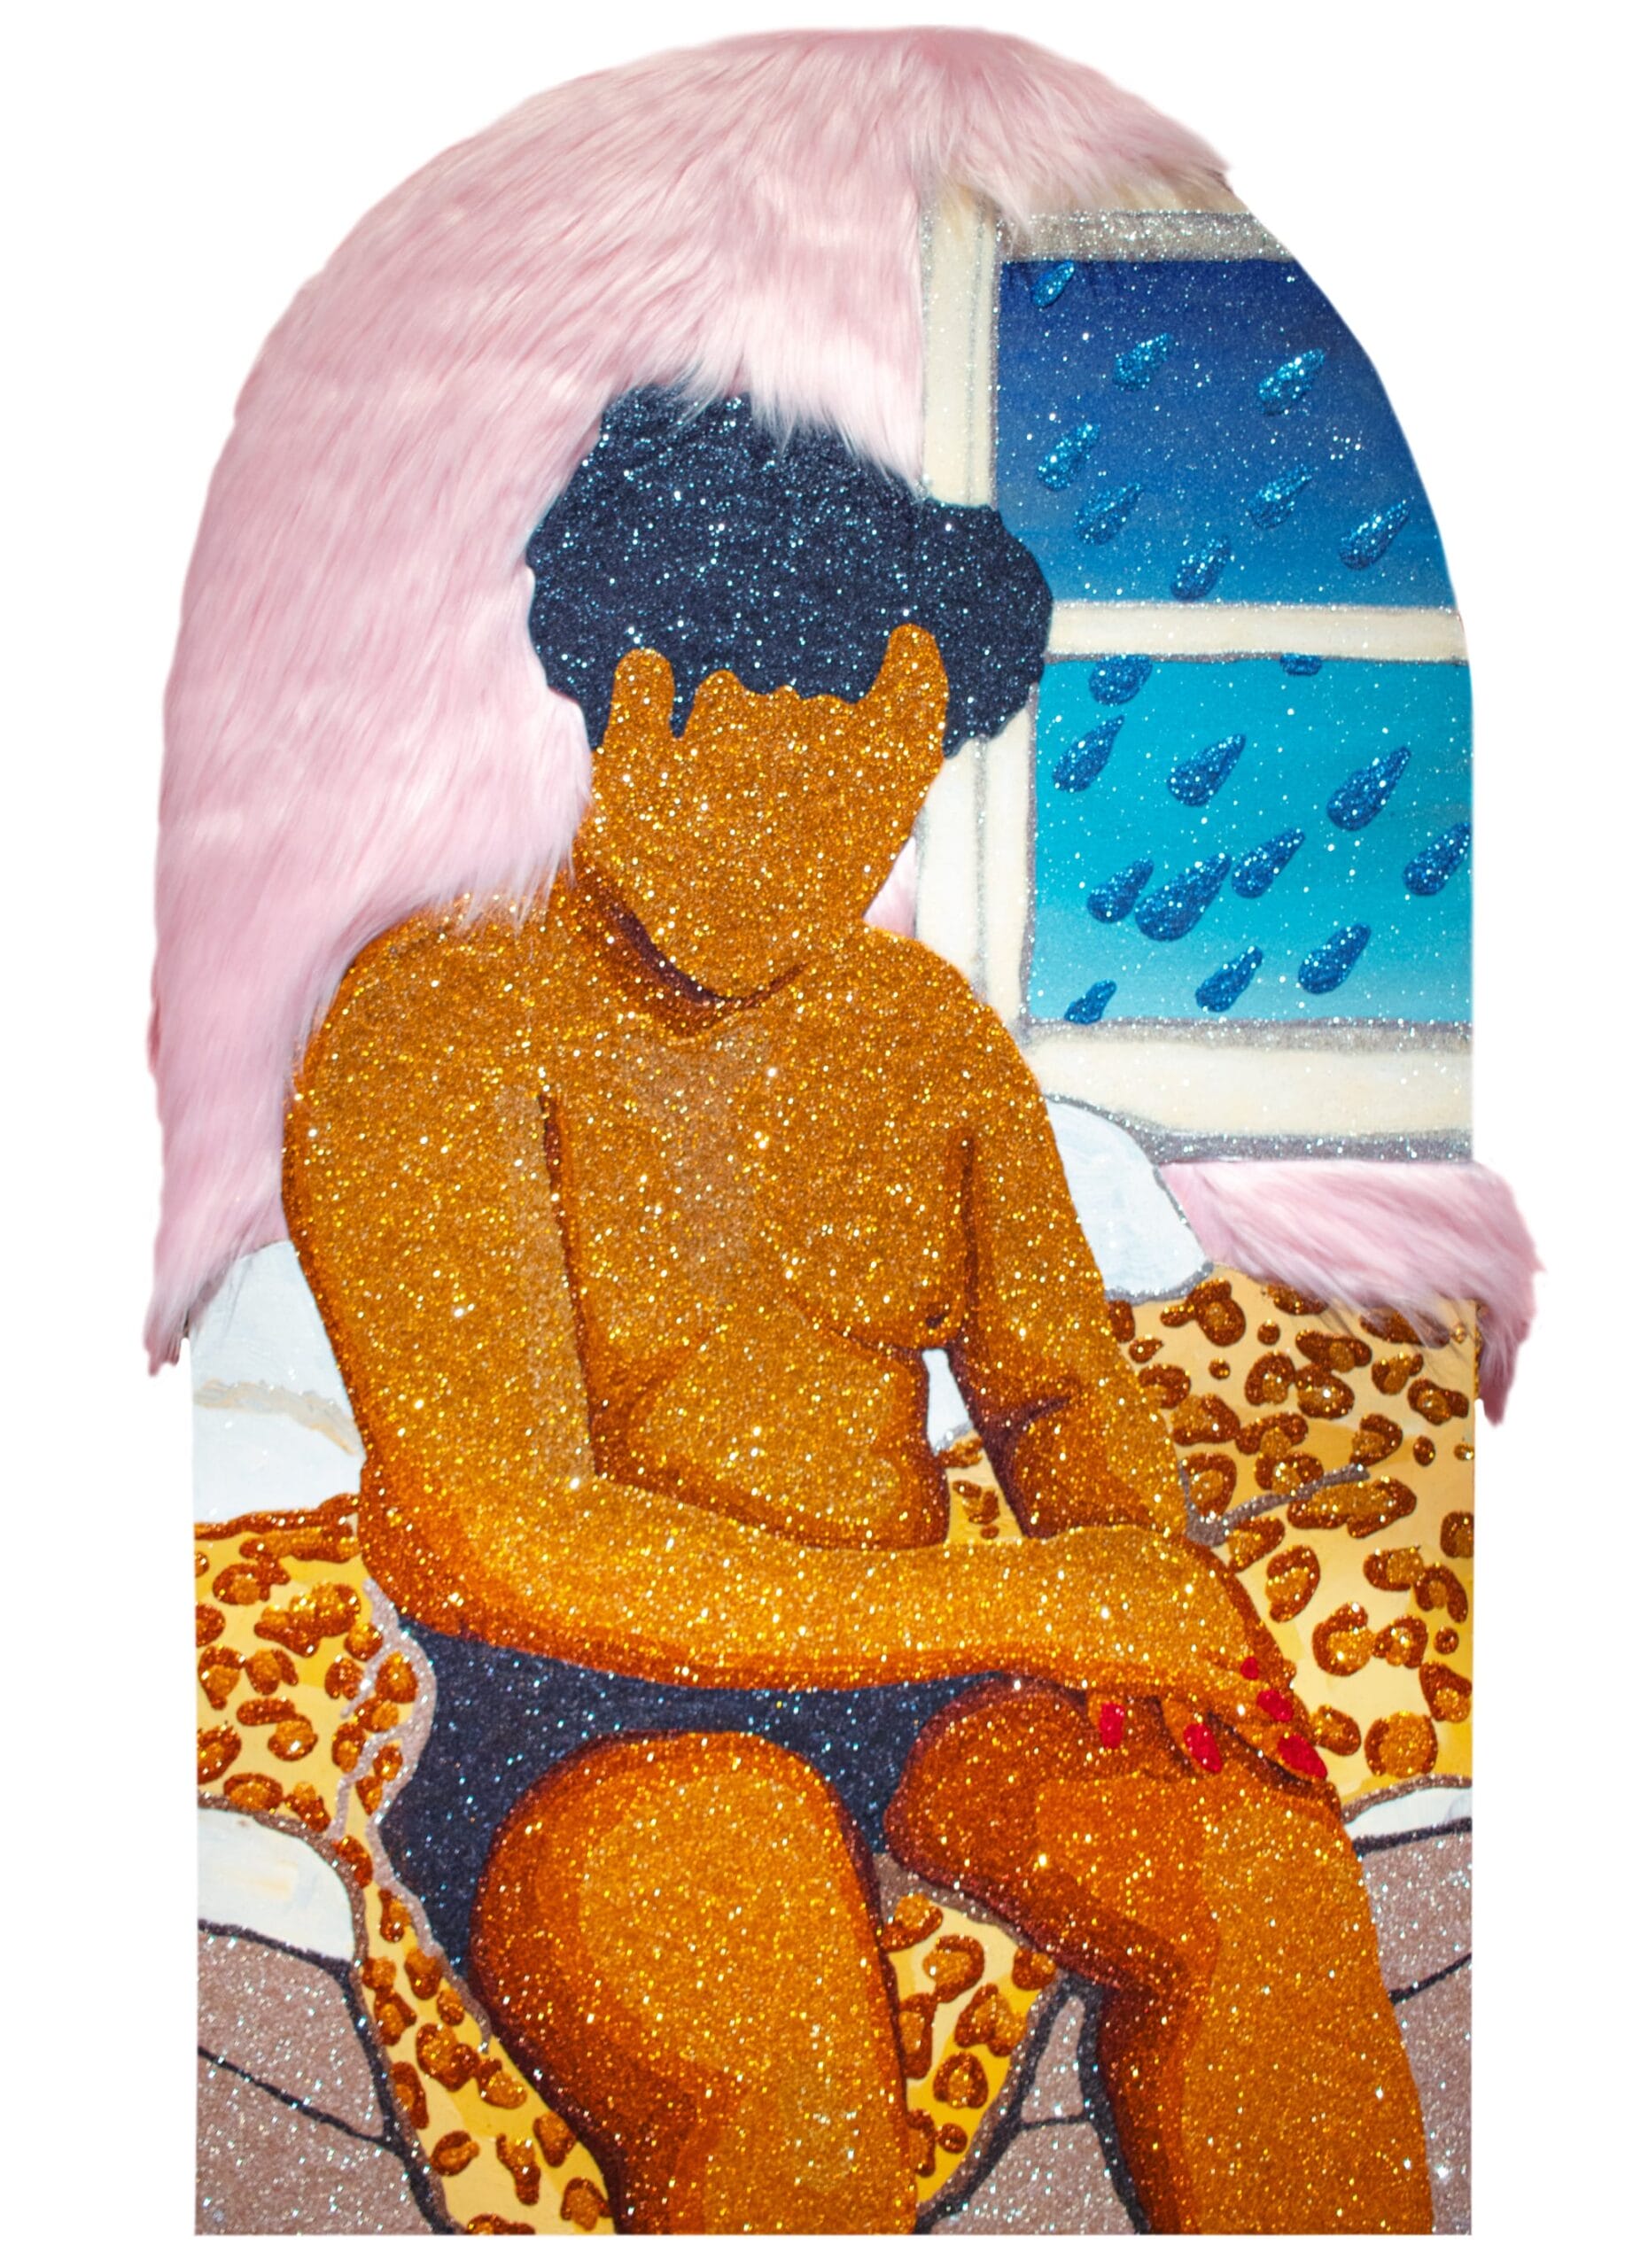 a faceless figure sits on a leopard print blanket wearing shorts. they are rendered in glitter with plush pink fur at the top of the work